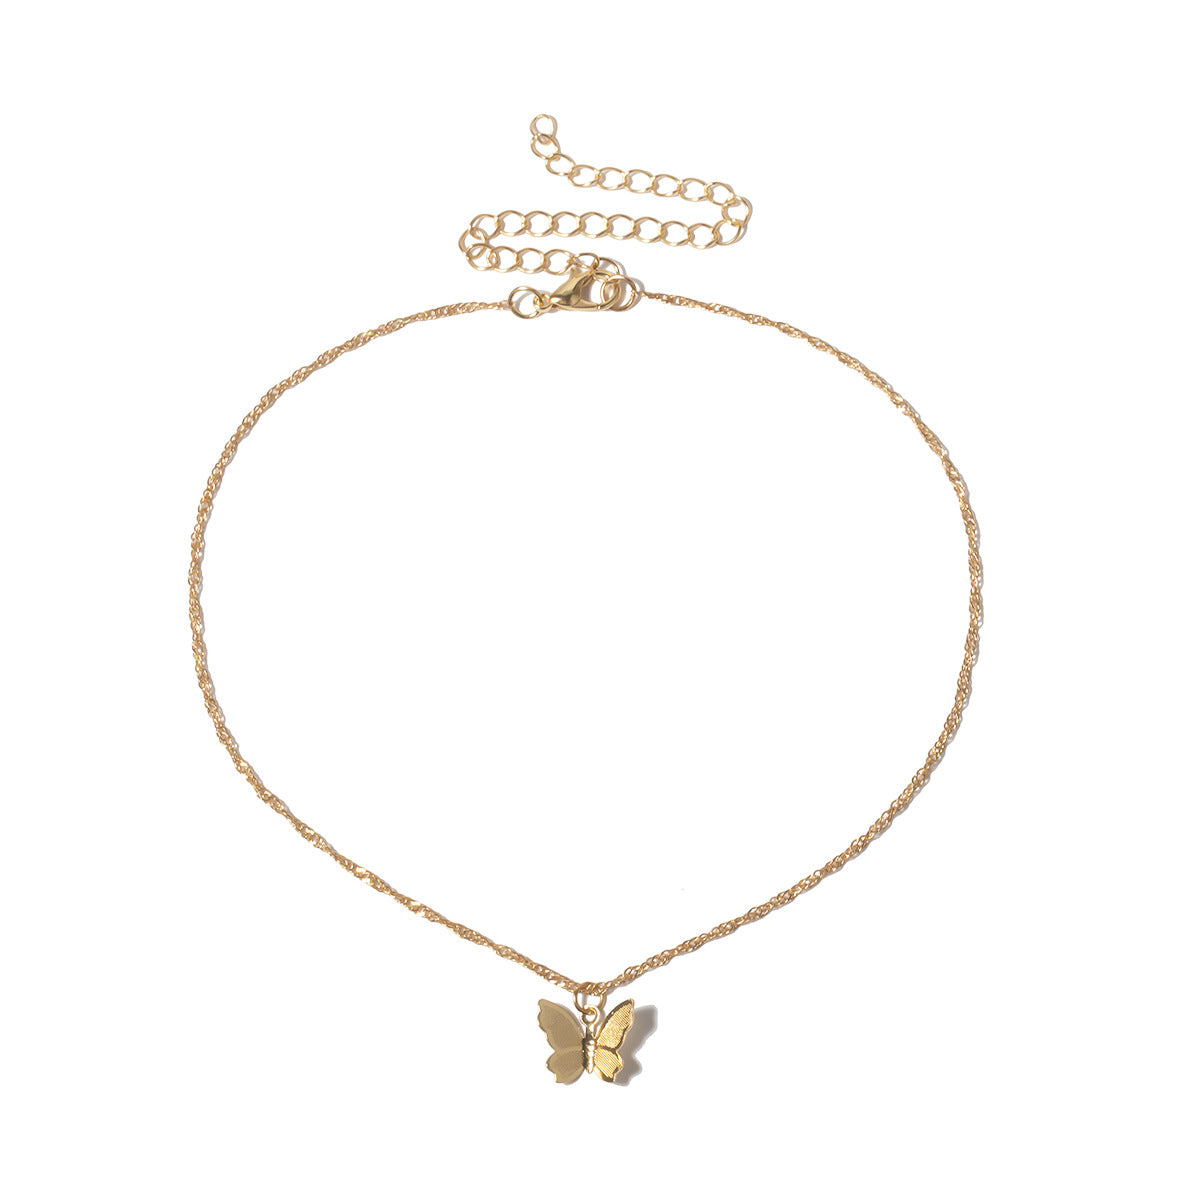 Golden Fluttering Butterfly Earrings and Necklace Set